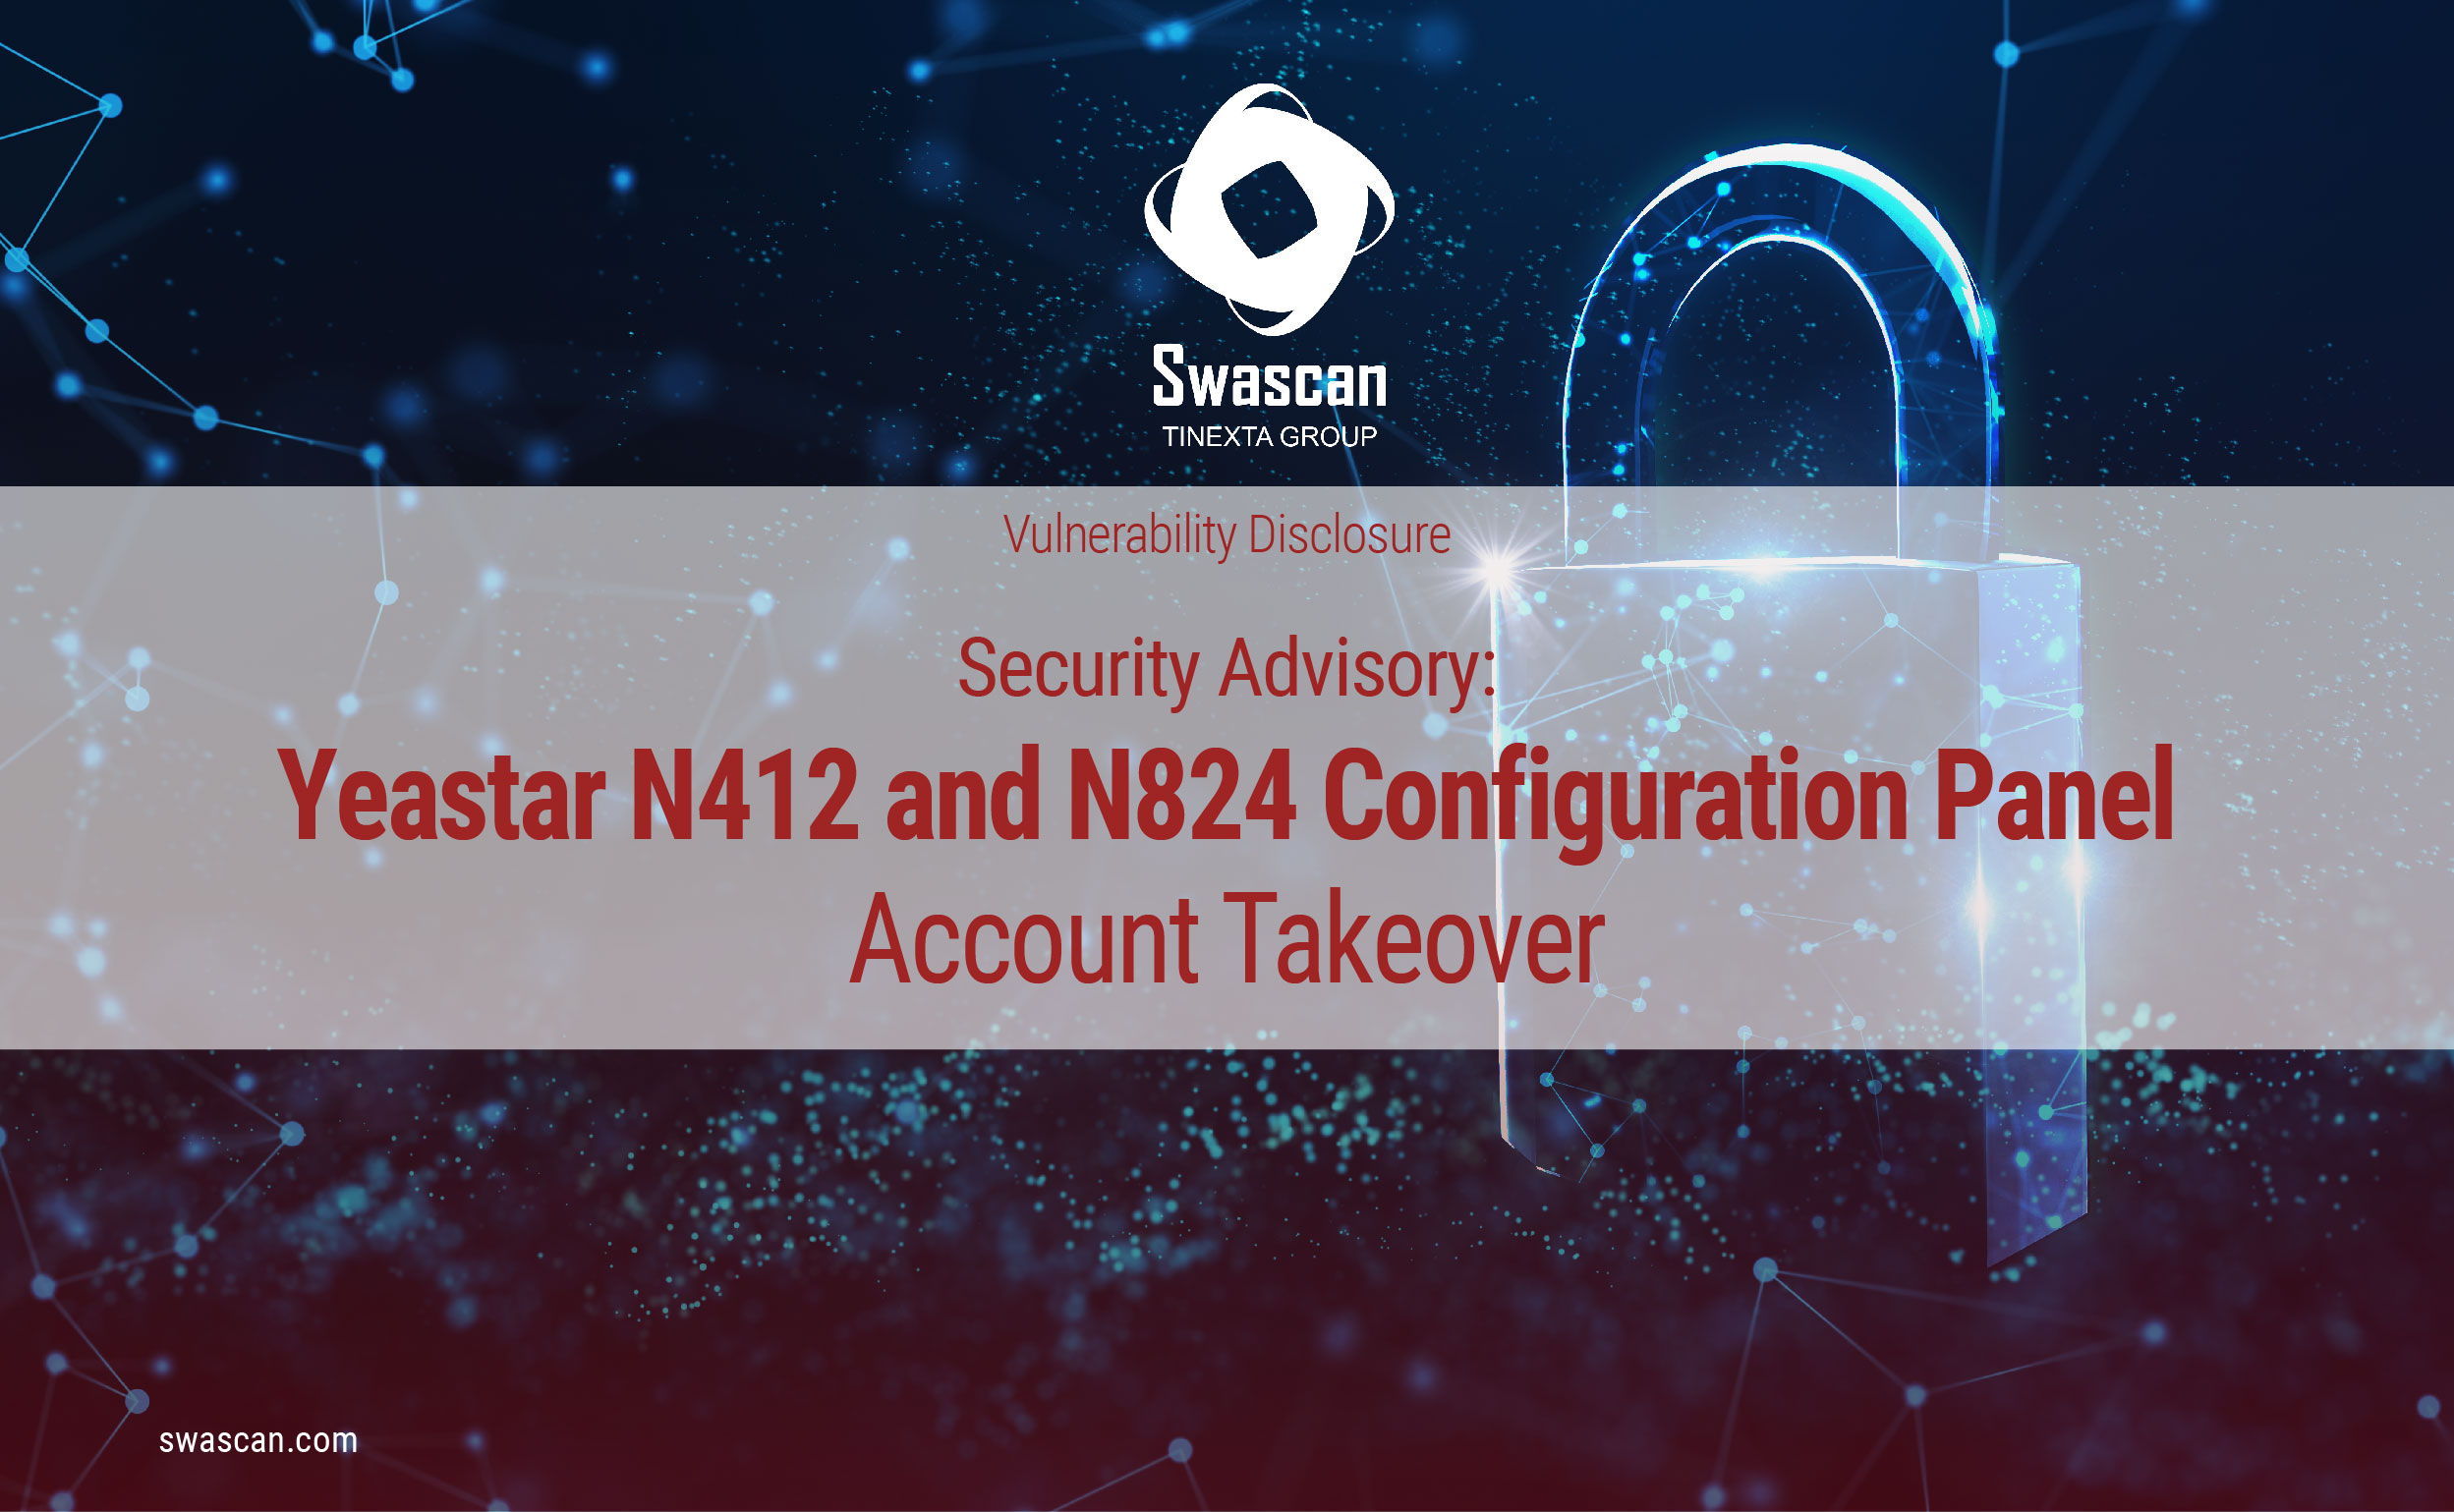 Security Advisory: Yeastar N412 and N824 Configuration Panel Account Takeover